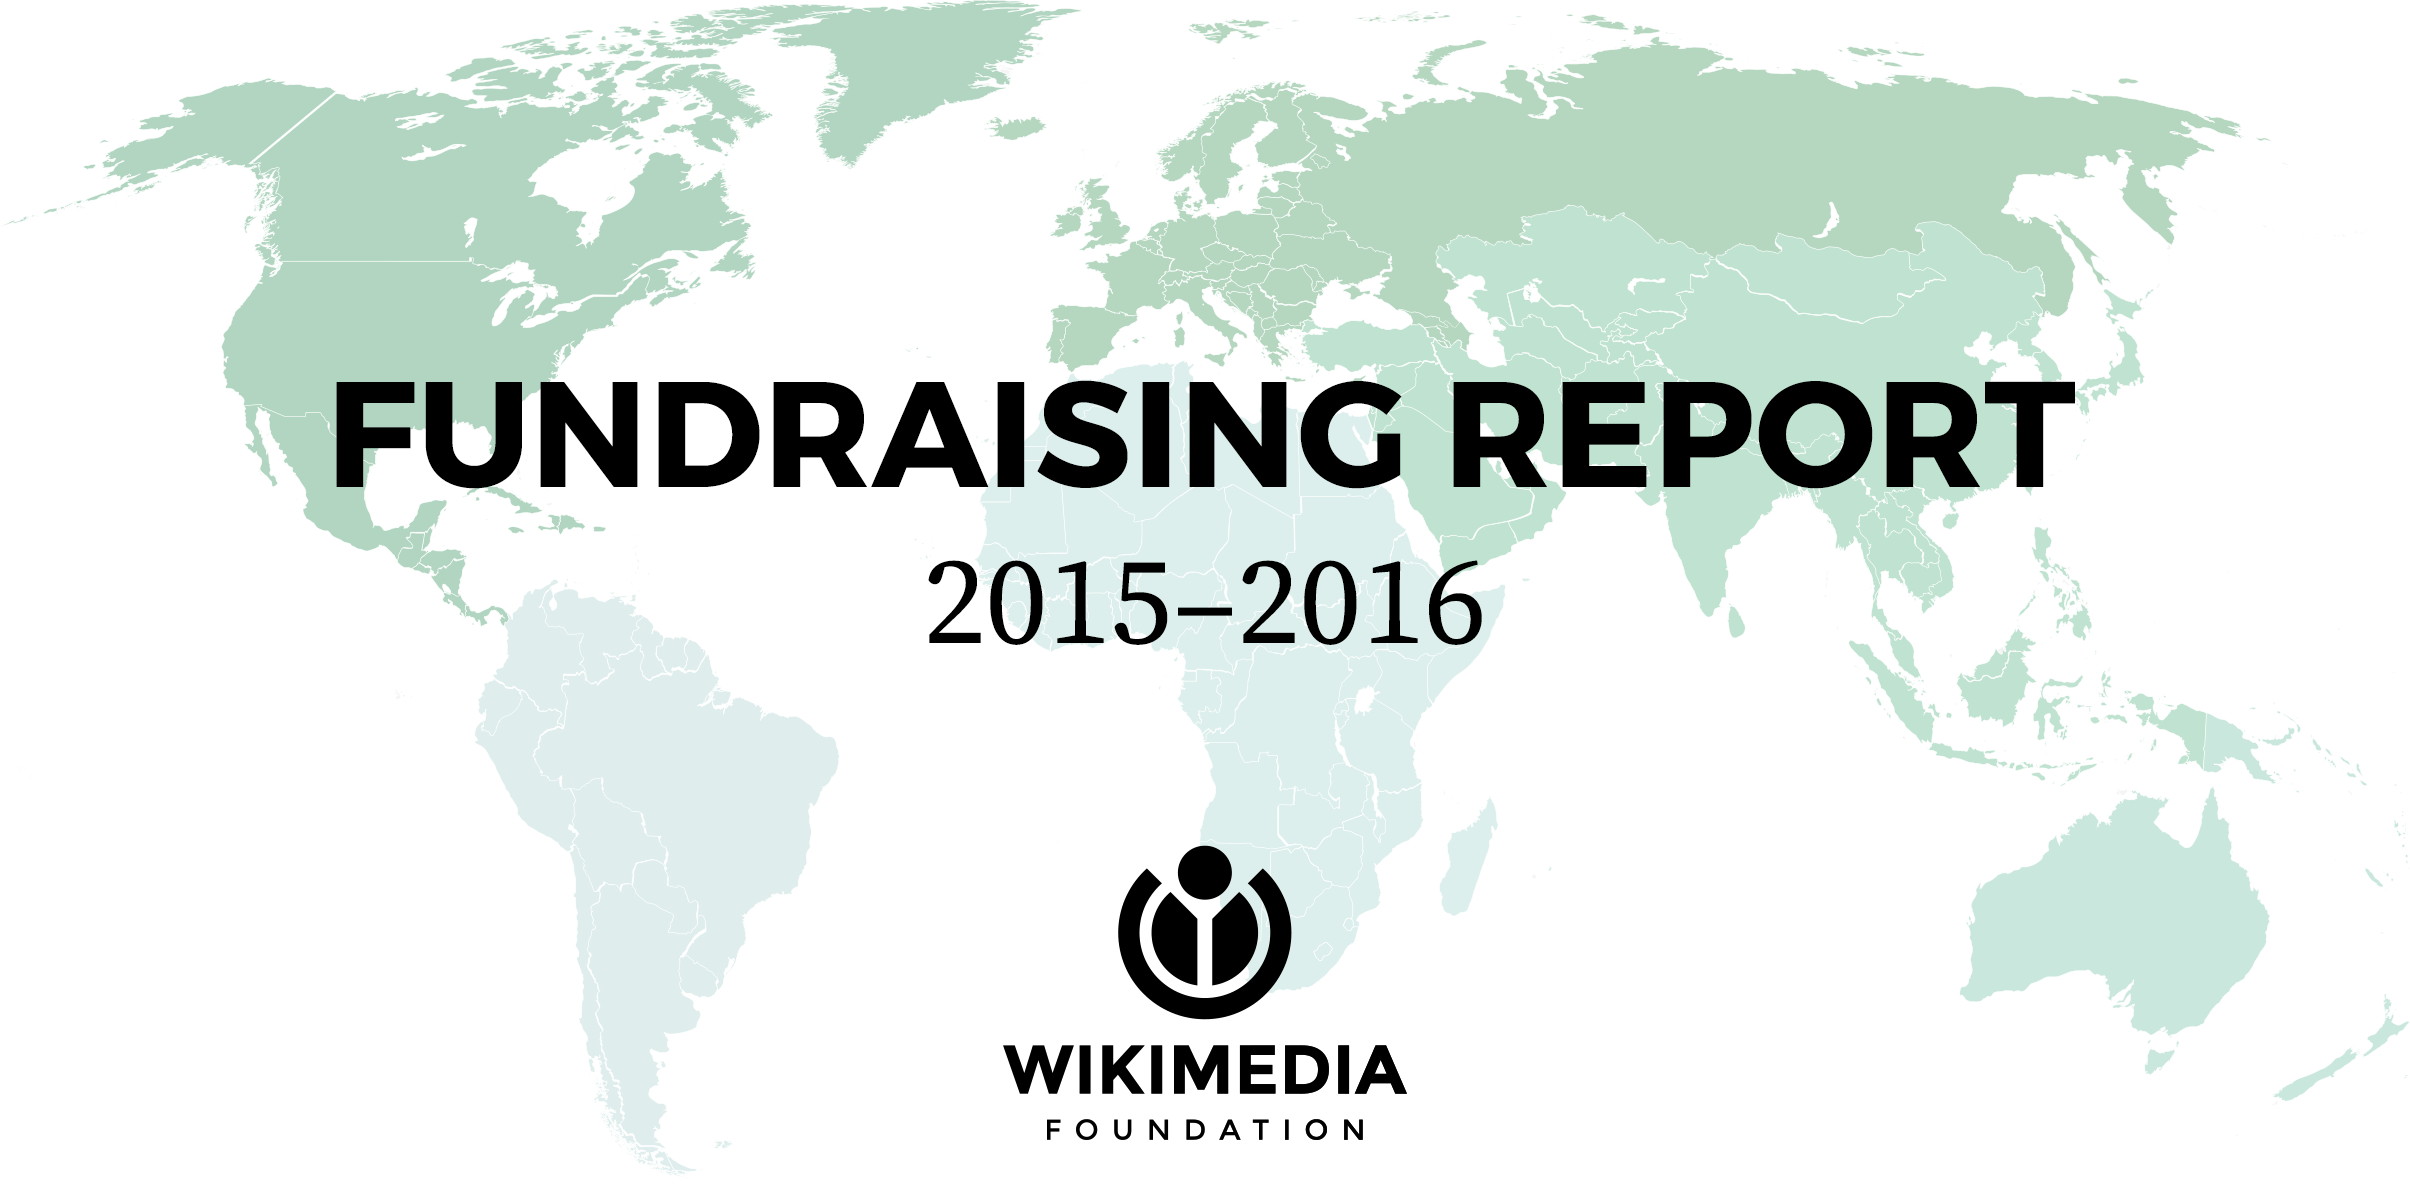 Map of the world with color scale indicating contributions per continent, for 2015–2016 Fundraising Report